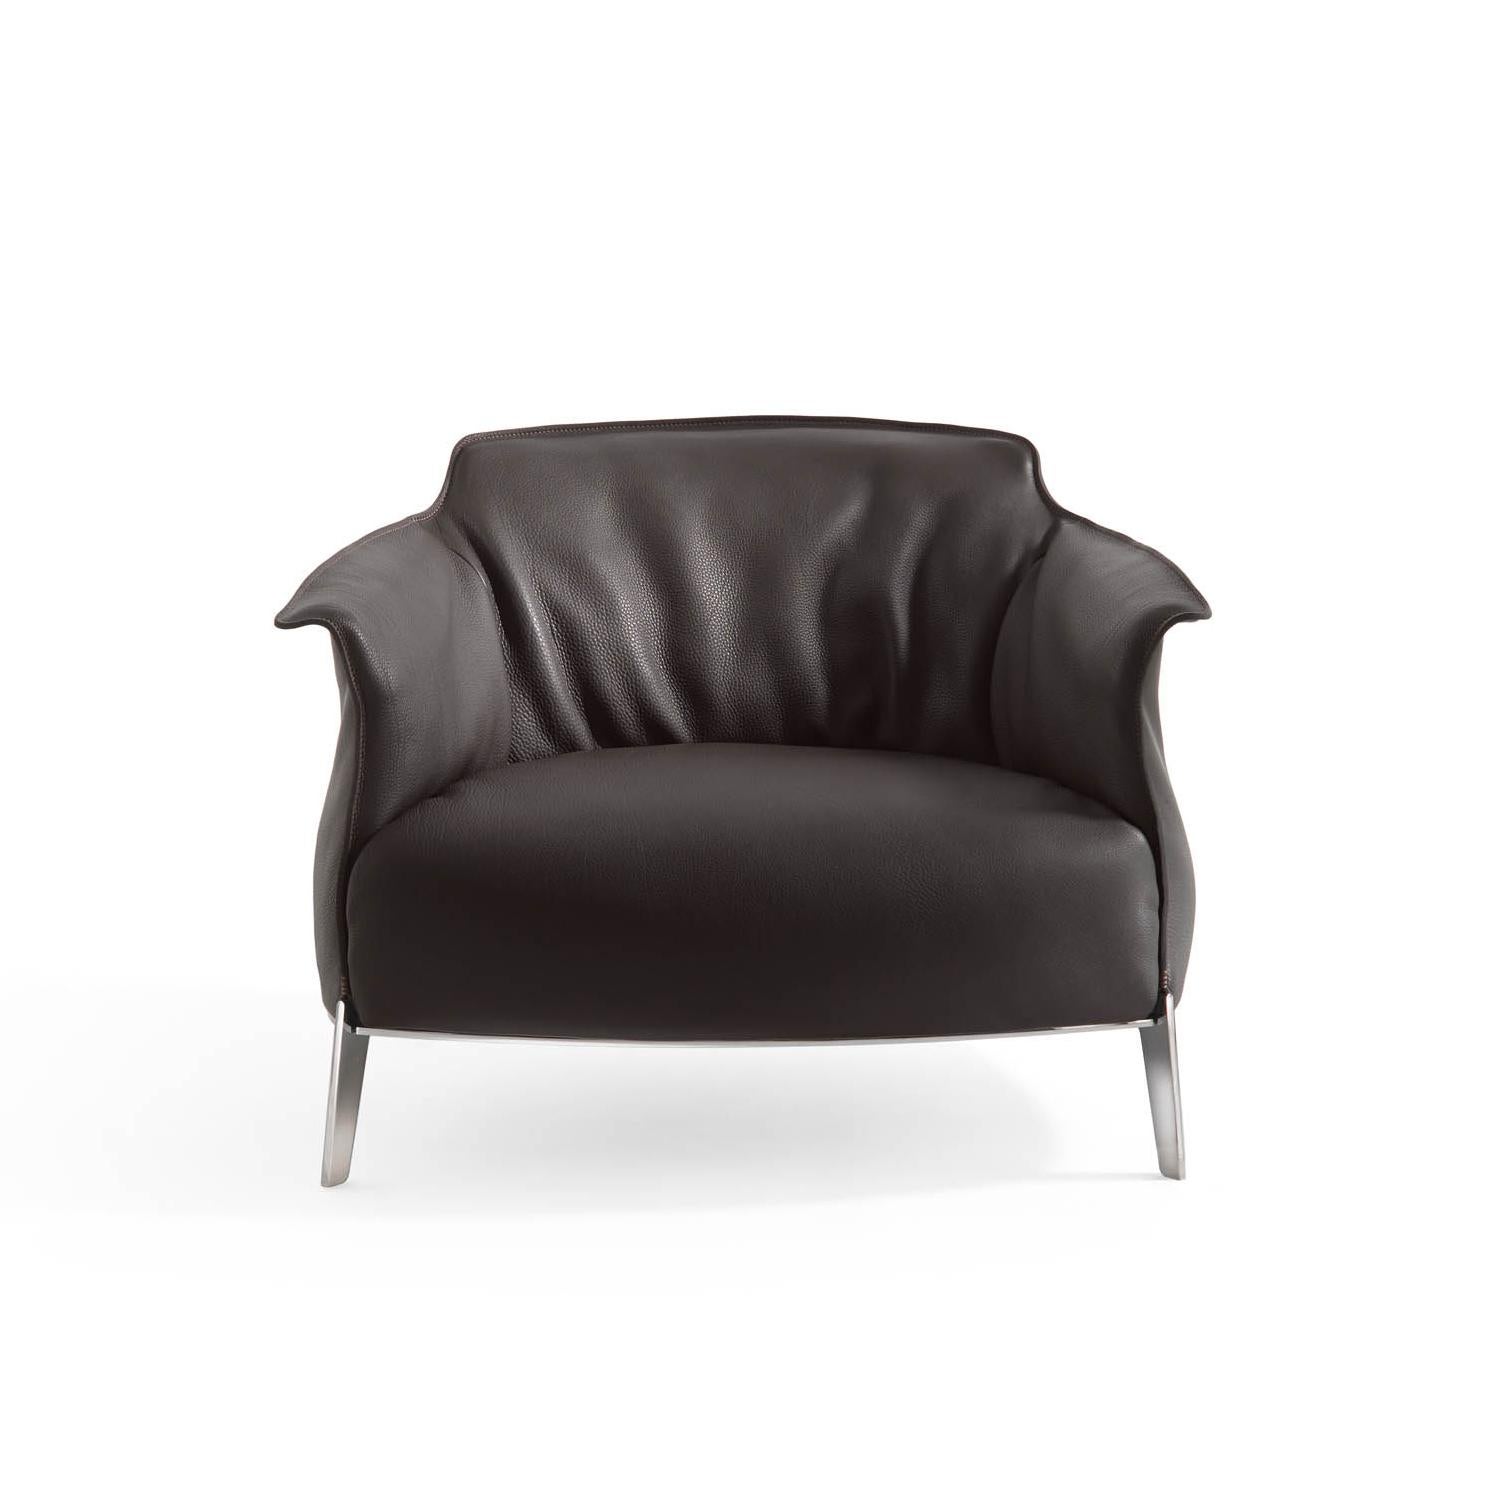 Jean-Marie Massaud adds a surplus of softness to the Archibald collection: the Archibald Gran Comfort armchair. The central element is the large, soft seat cushion. A luxurious leather casing with rich goose down padding that creates a refined